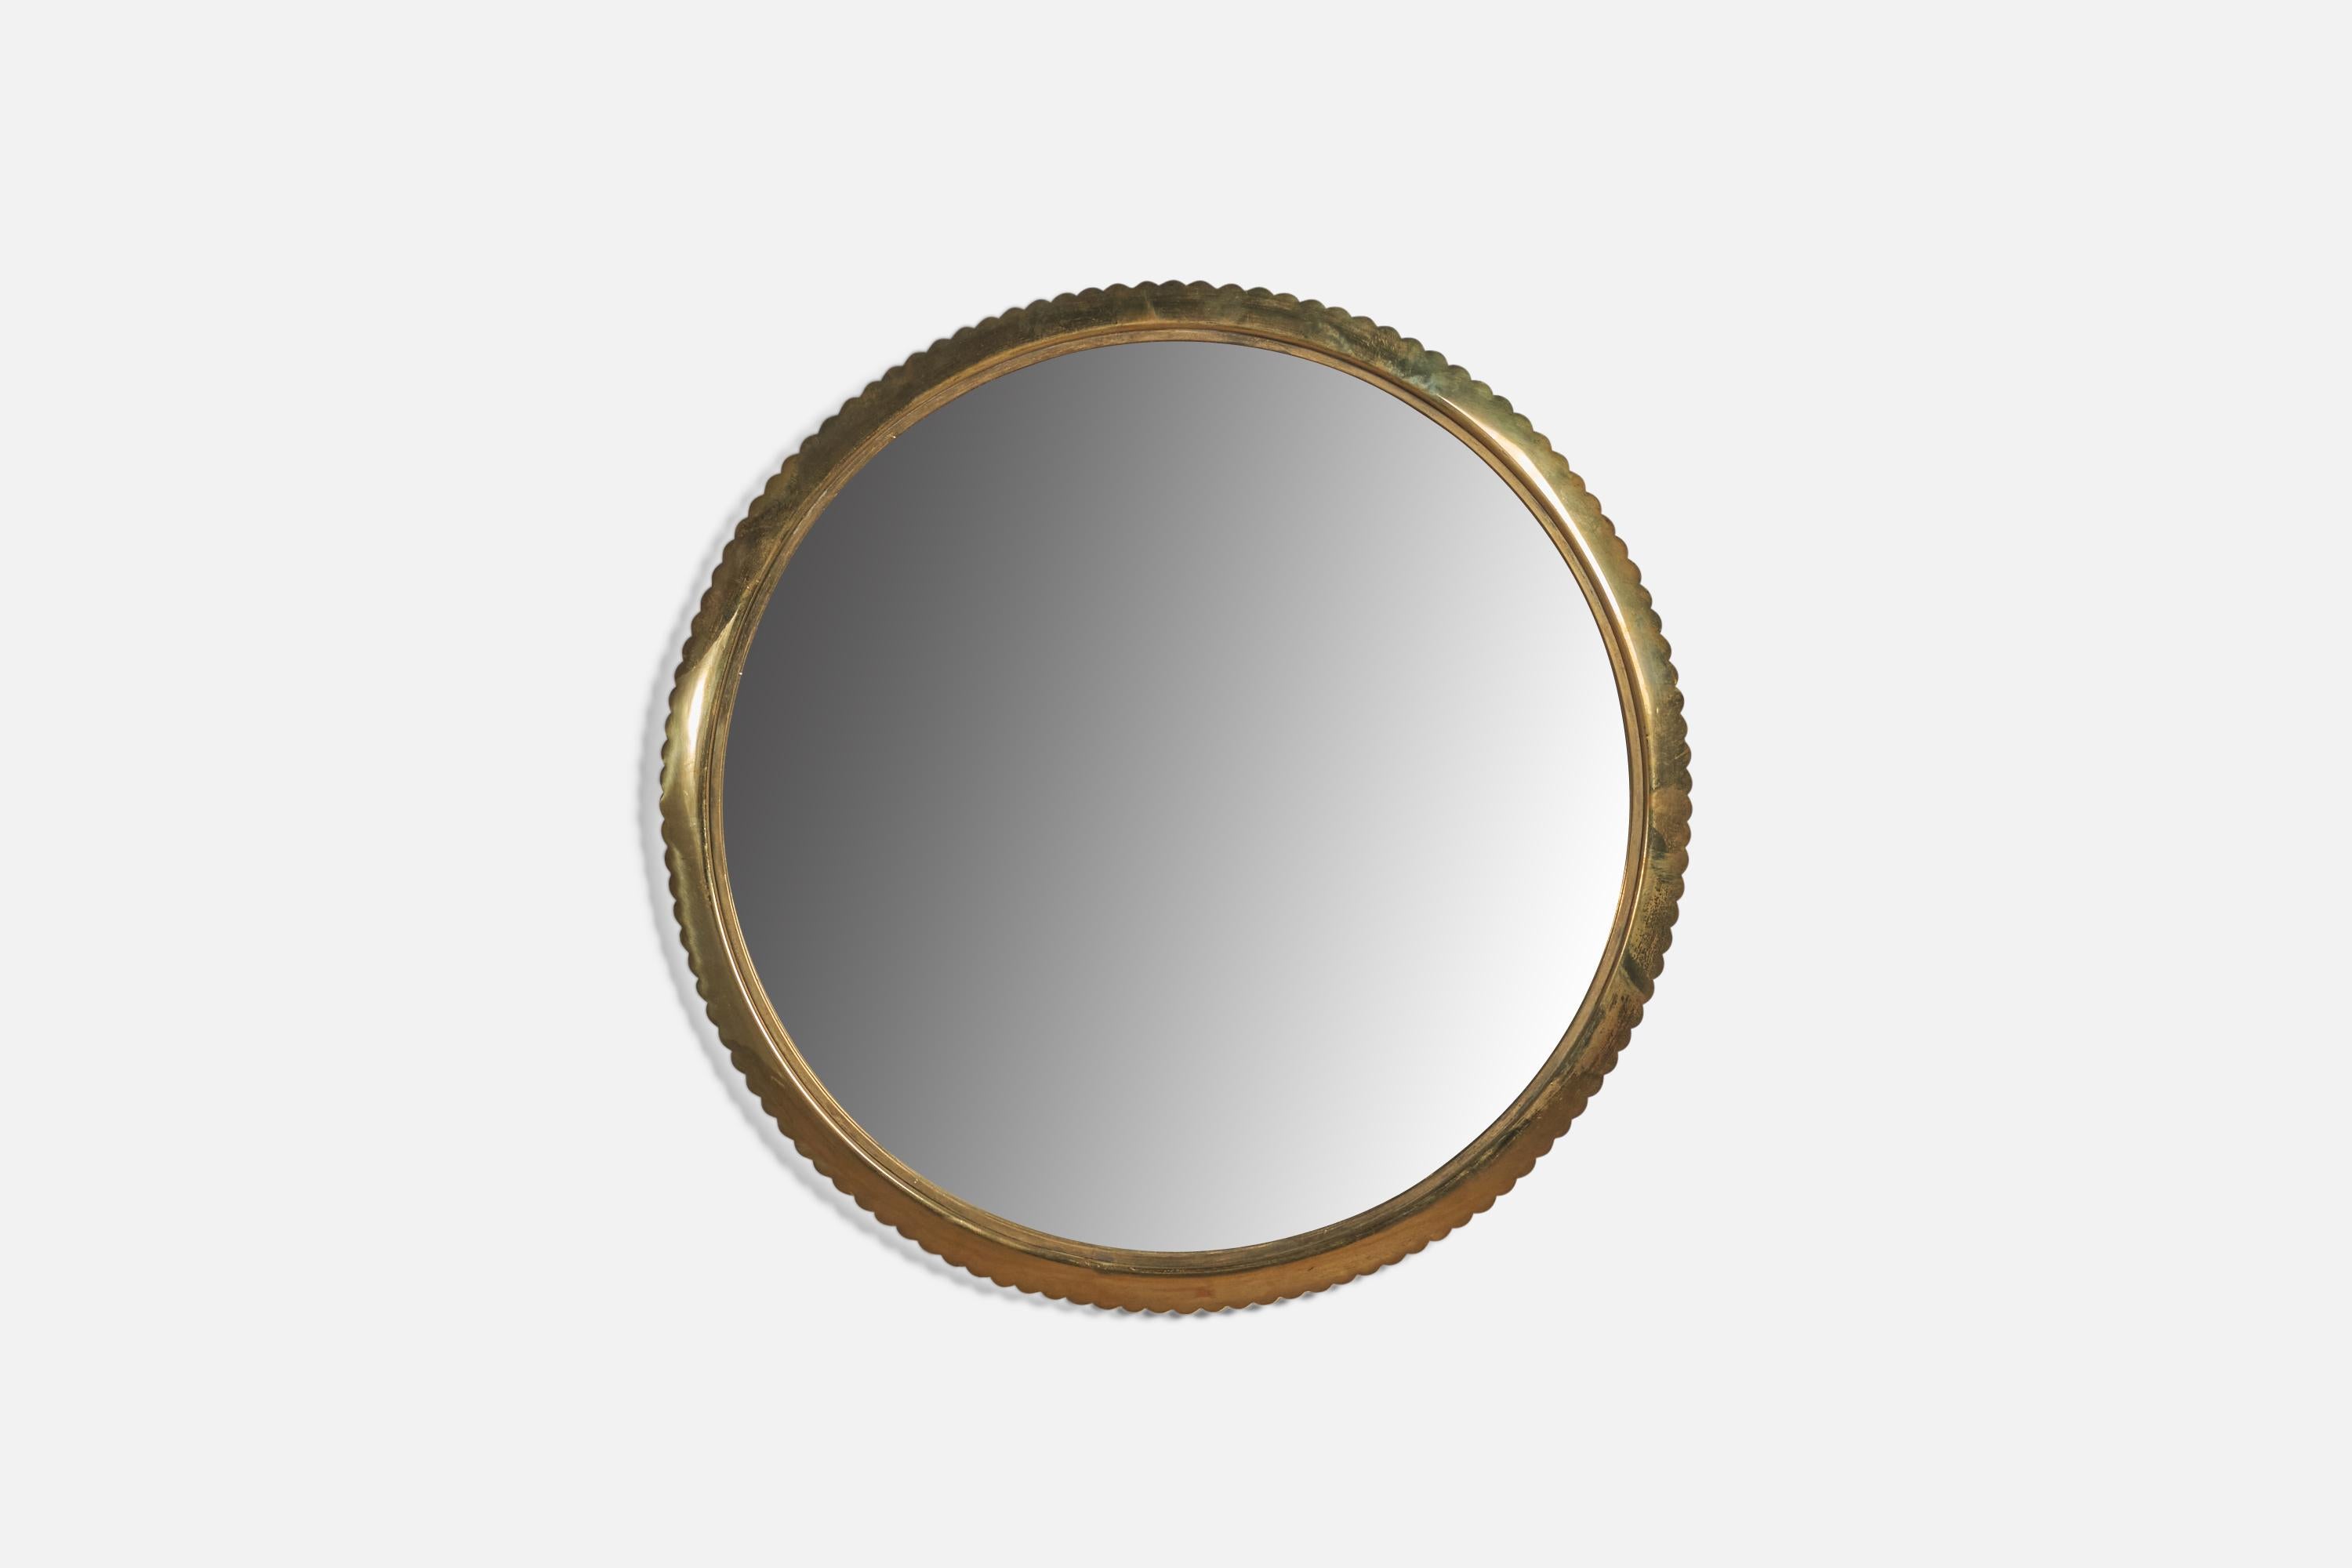 A brass wall mirror designed and produced in Italy, 1940s